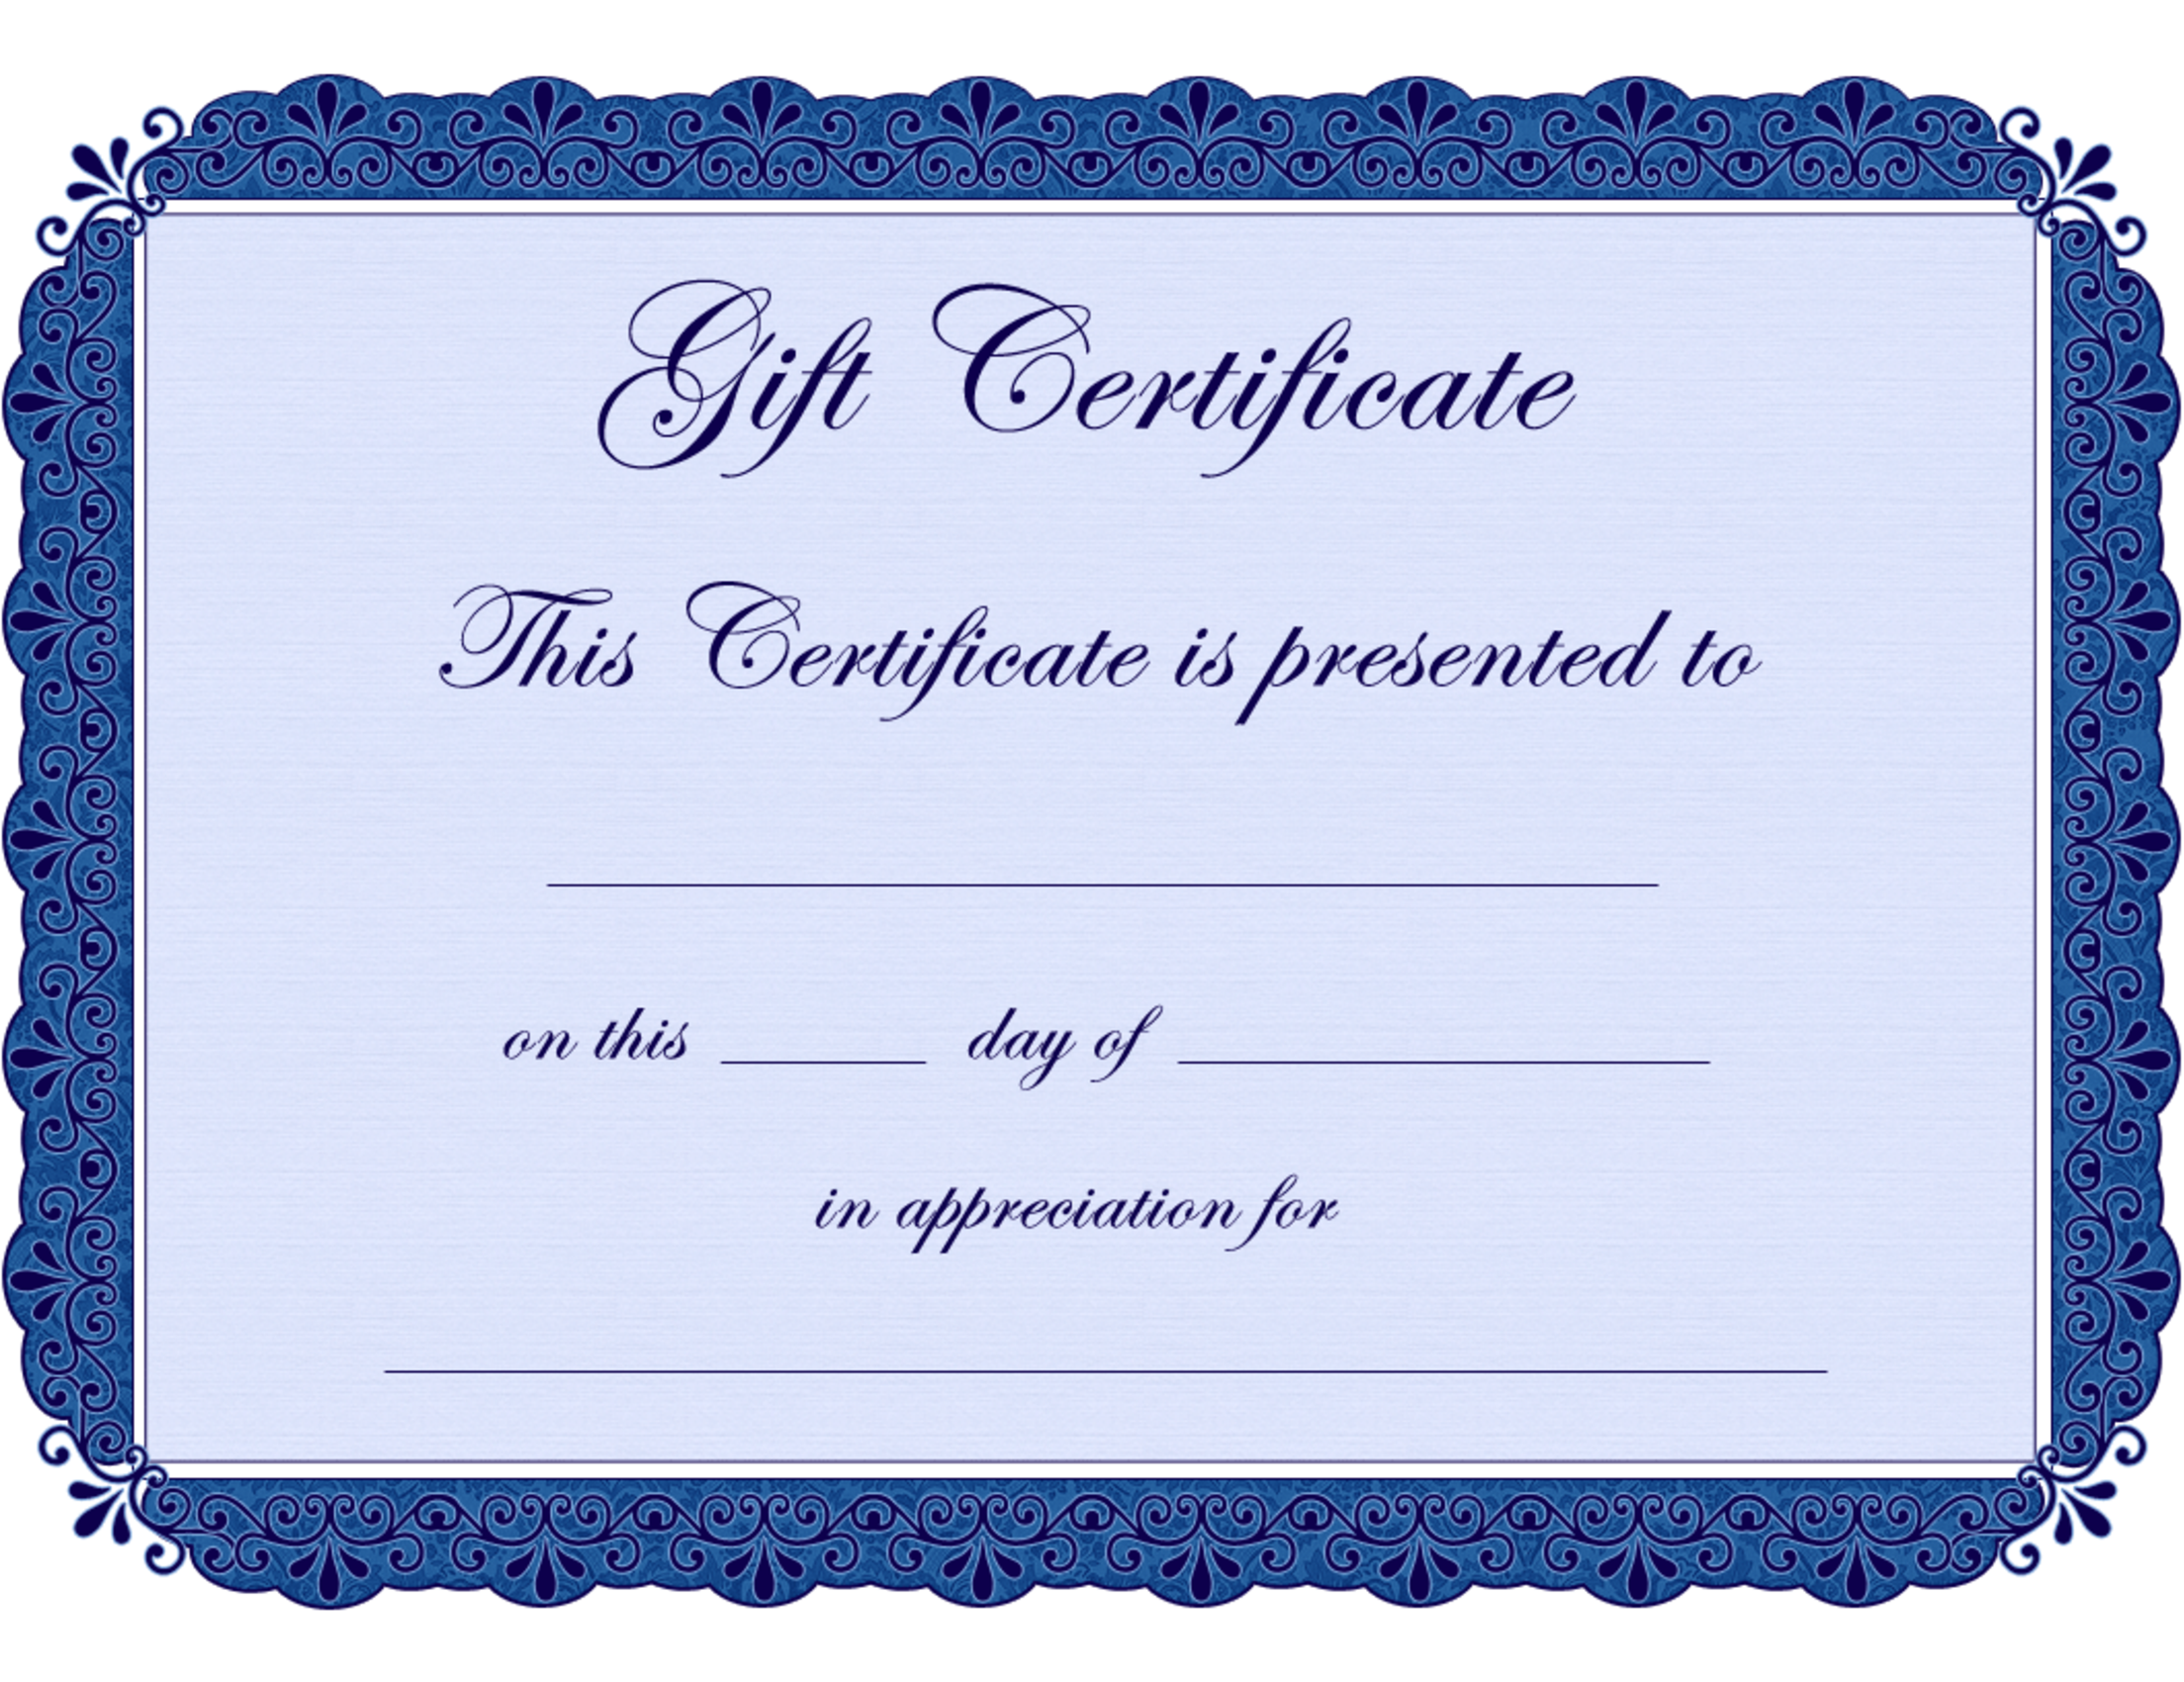 clipart gift certificates - photo #2